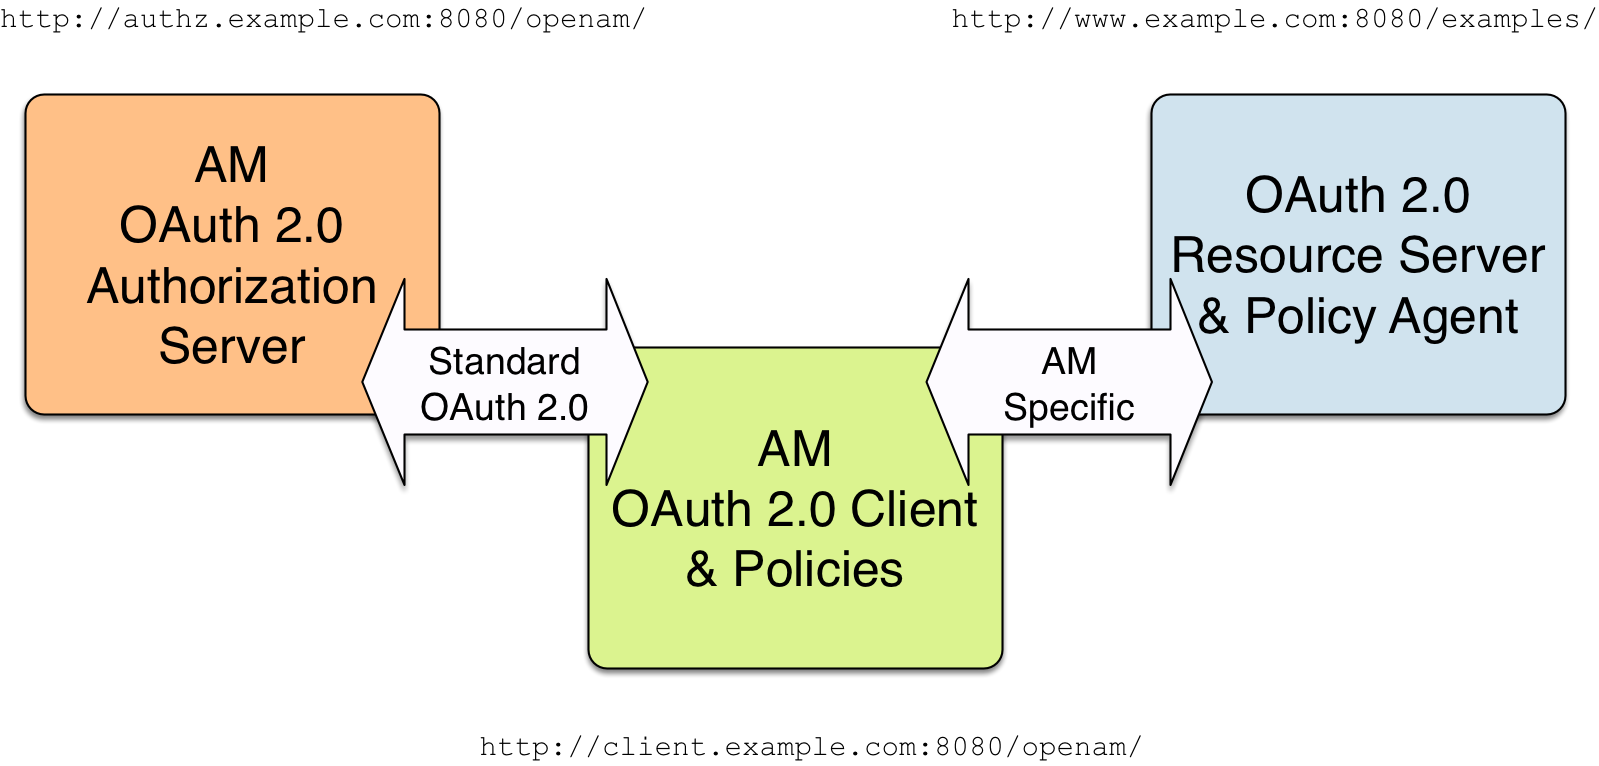 am 6 > oauth 2.0 guide